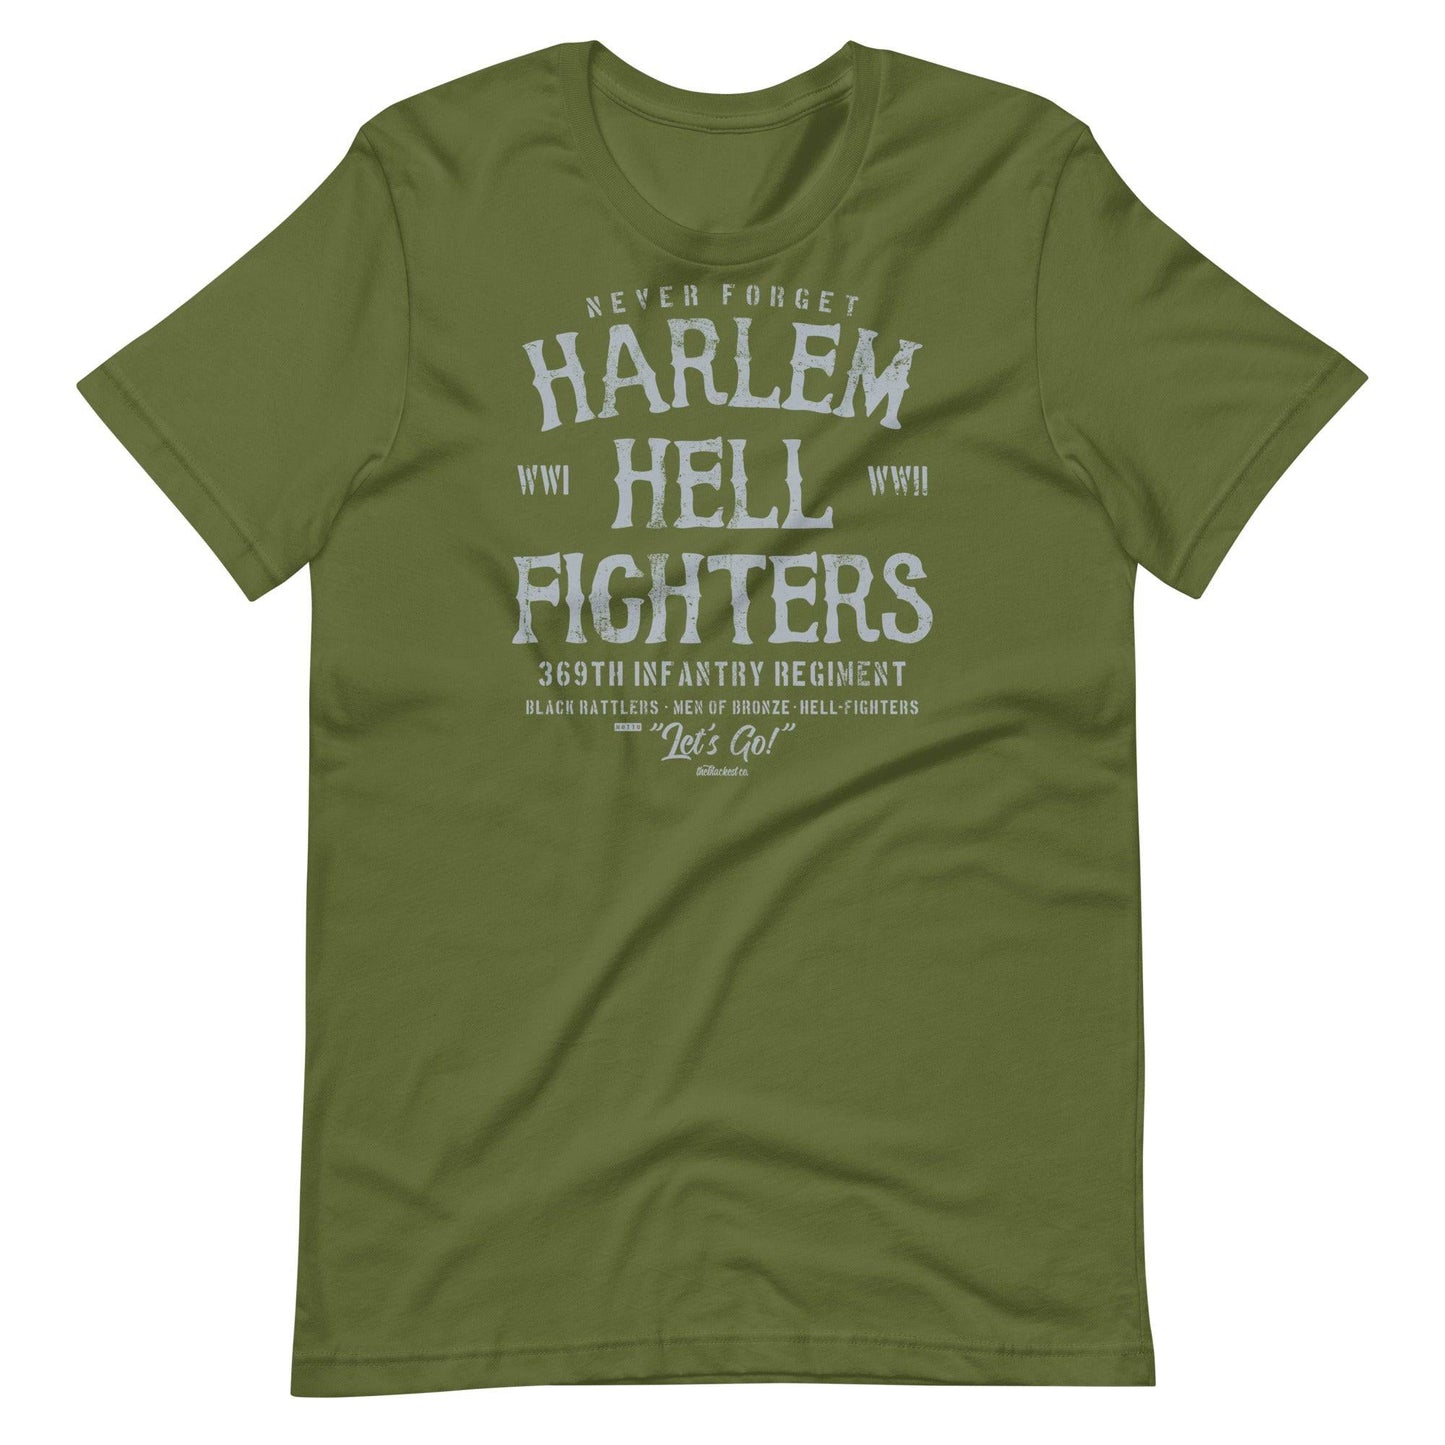 Harlem Hellfighters Black Soldiers World Wars I and II T-Shirt